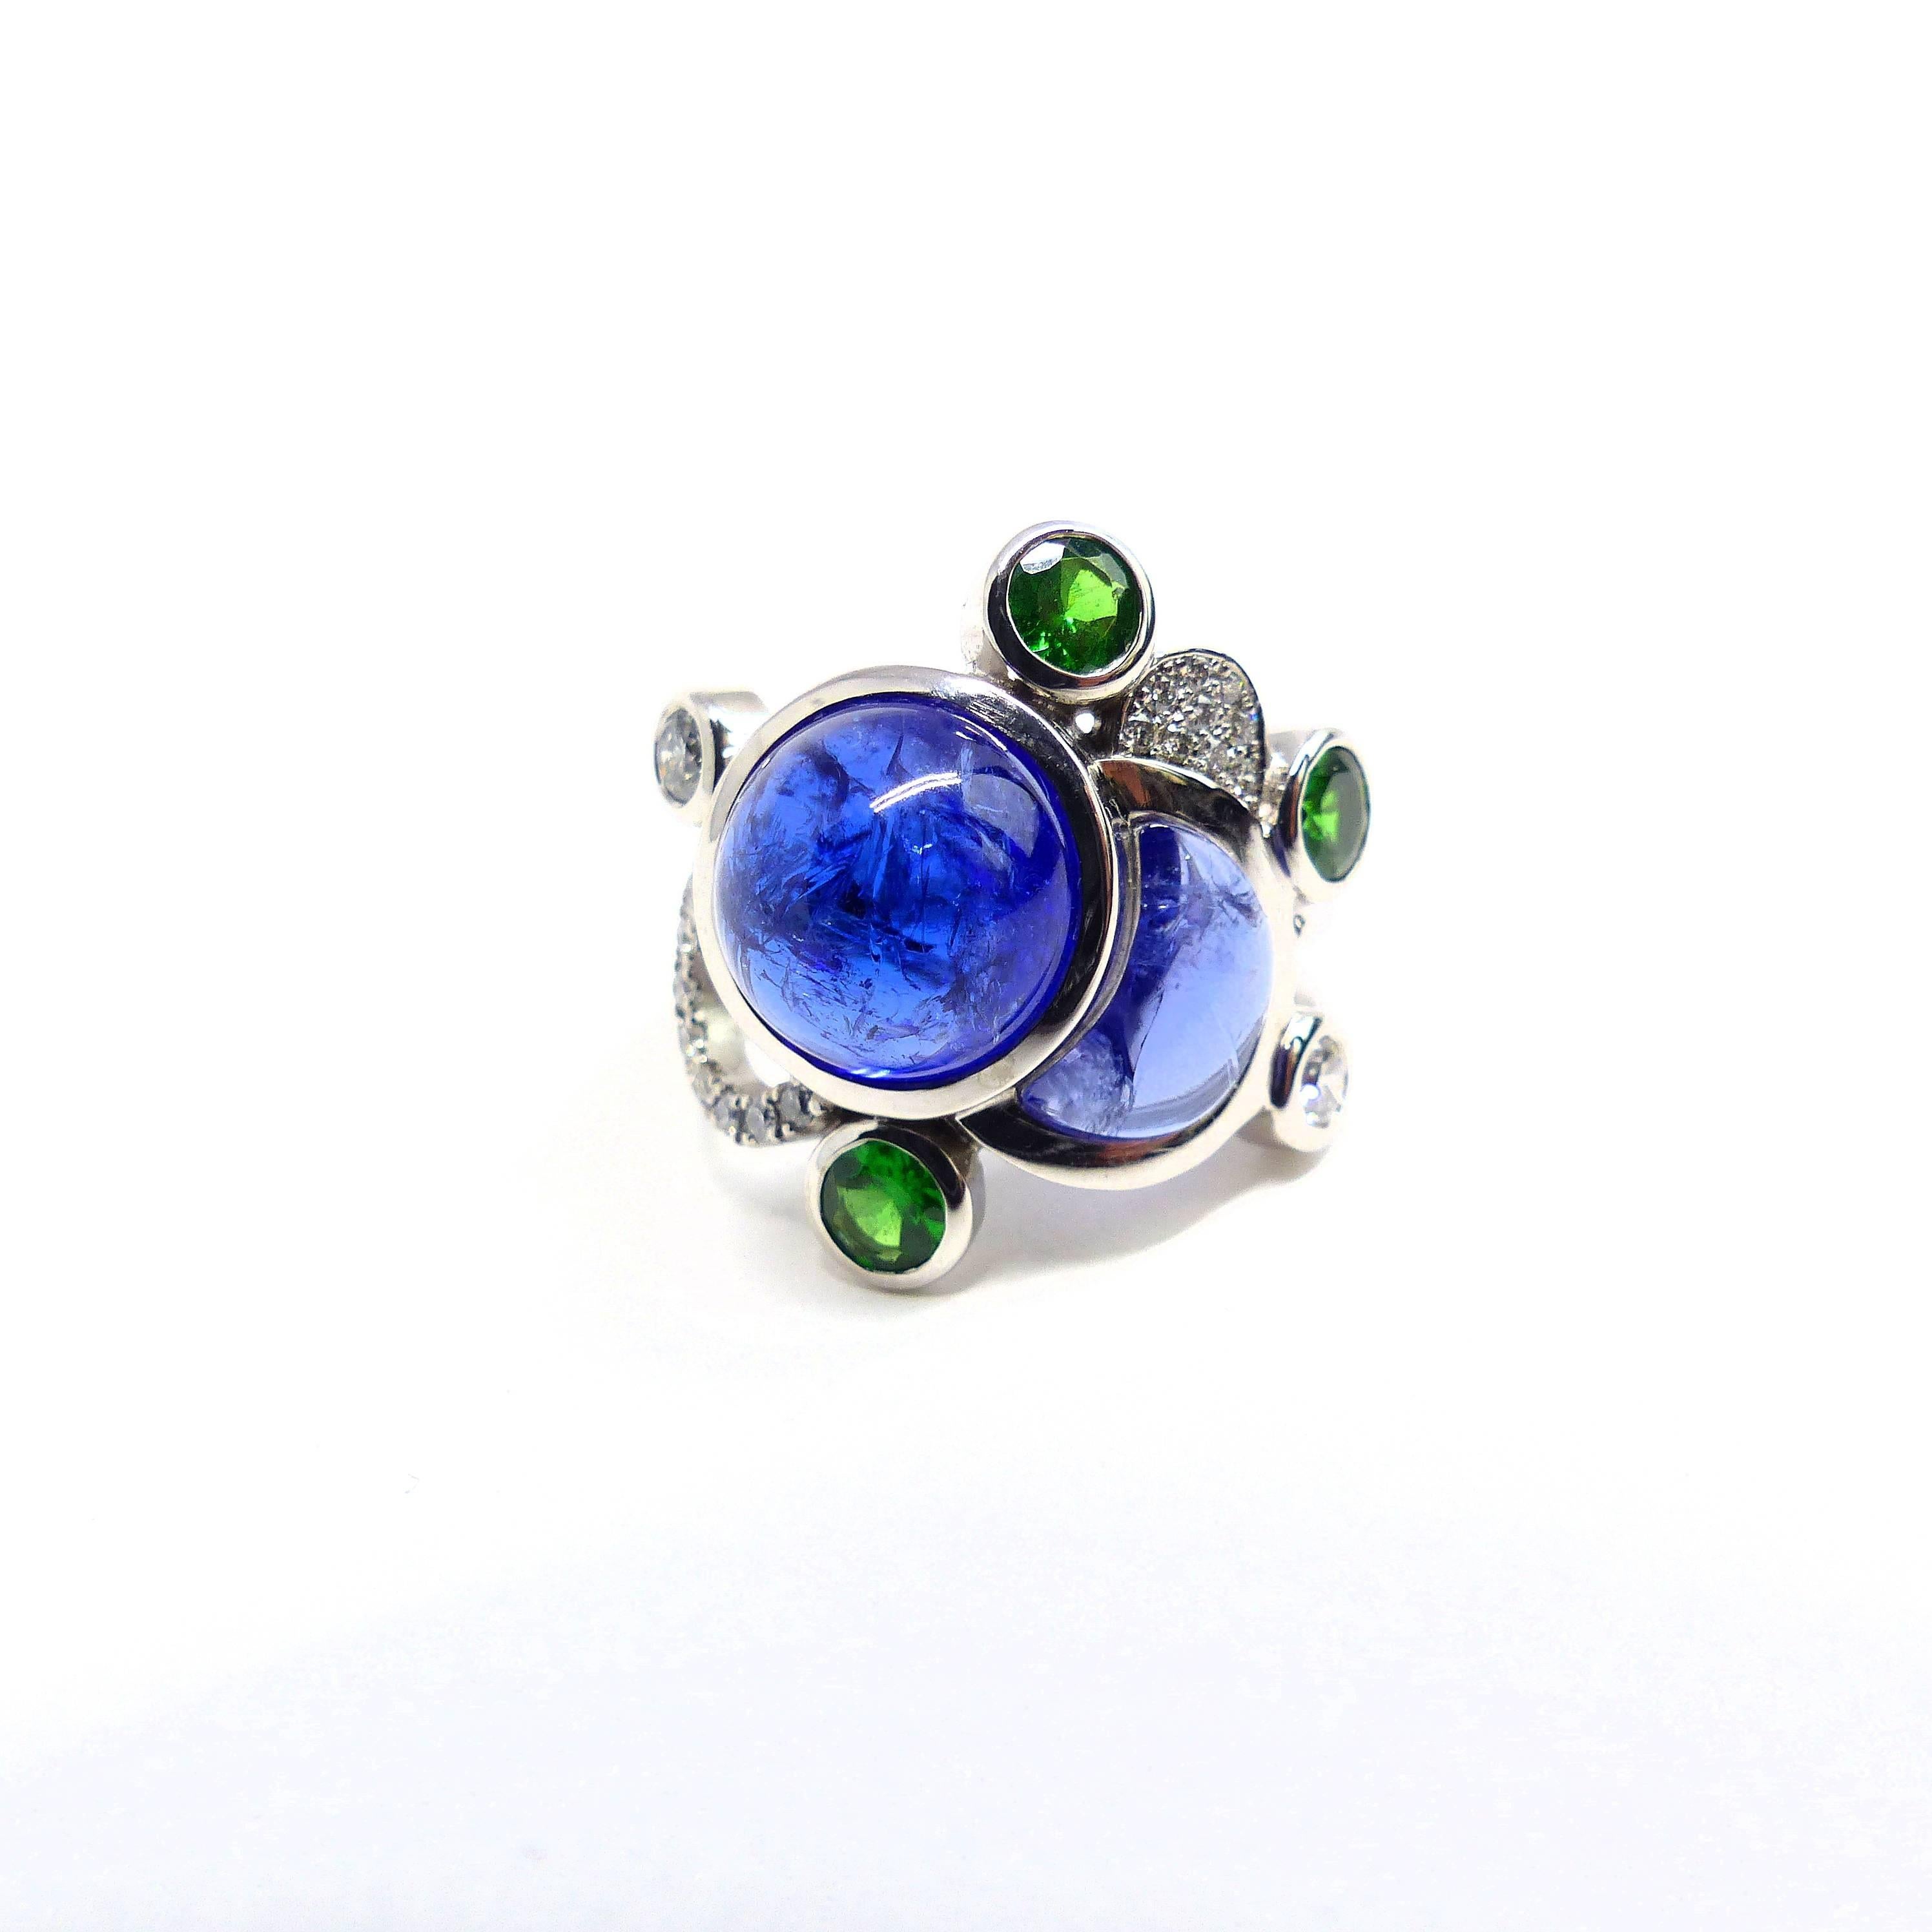 Thomas Leyser is renowned for his contemporary jewellery designs utilizing fine gemstones. 

This 18k white gold (11.44g) ring is set with 2x Tanzanite Cabouchons (round, 11mm) + 1x fancy cut (8,26ct) + 3x Tsavorites (brillant-cut, 4mm, 0.81ct) + 2x